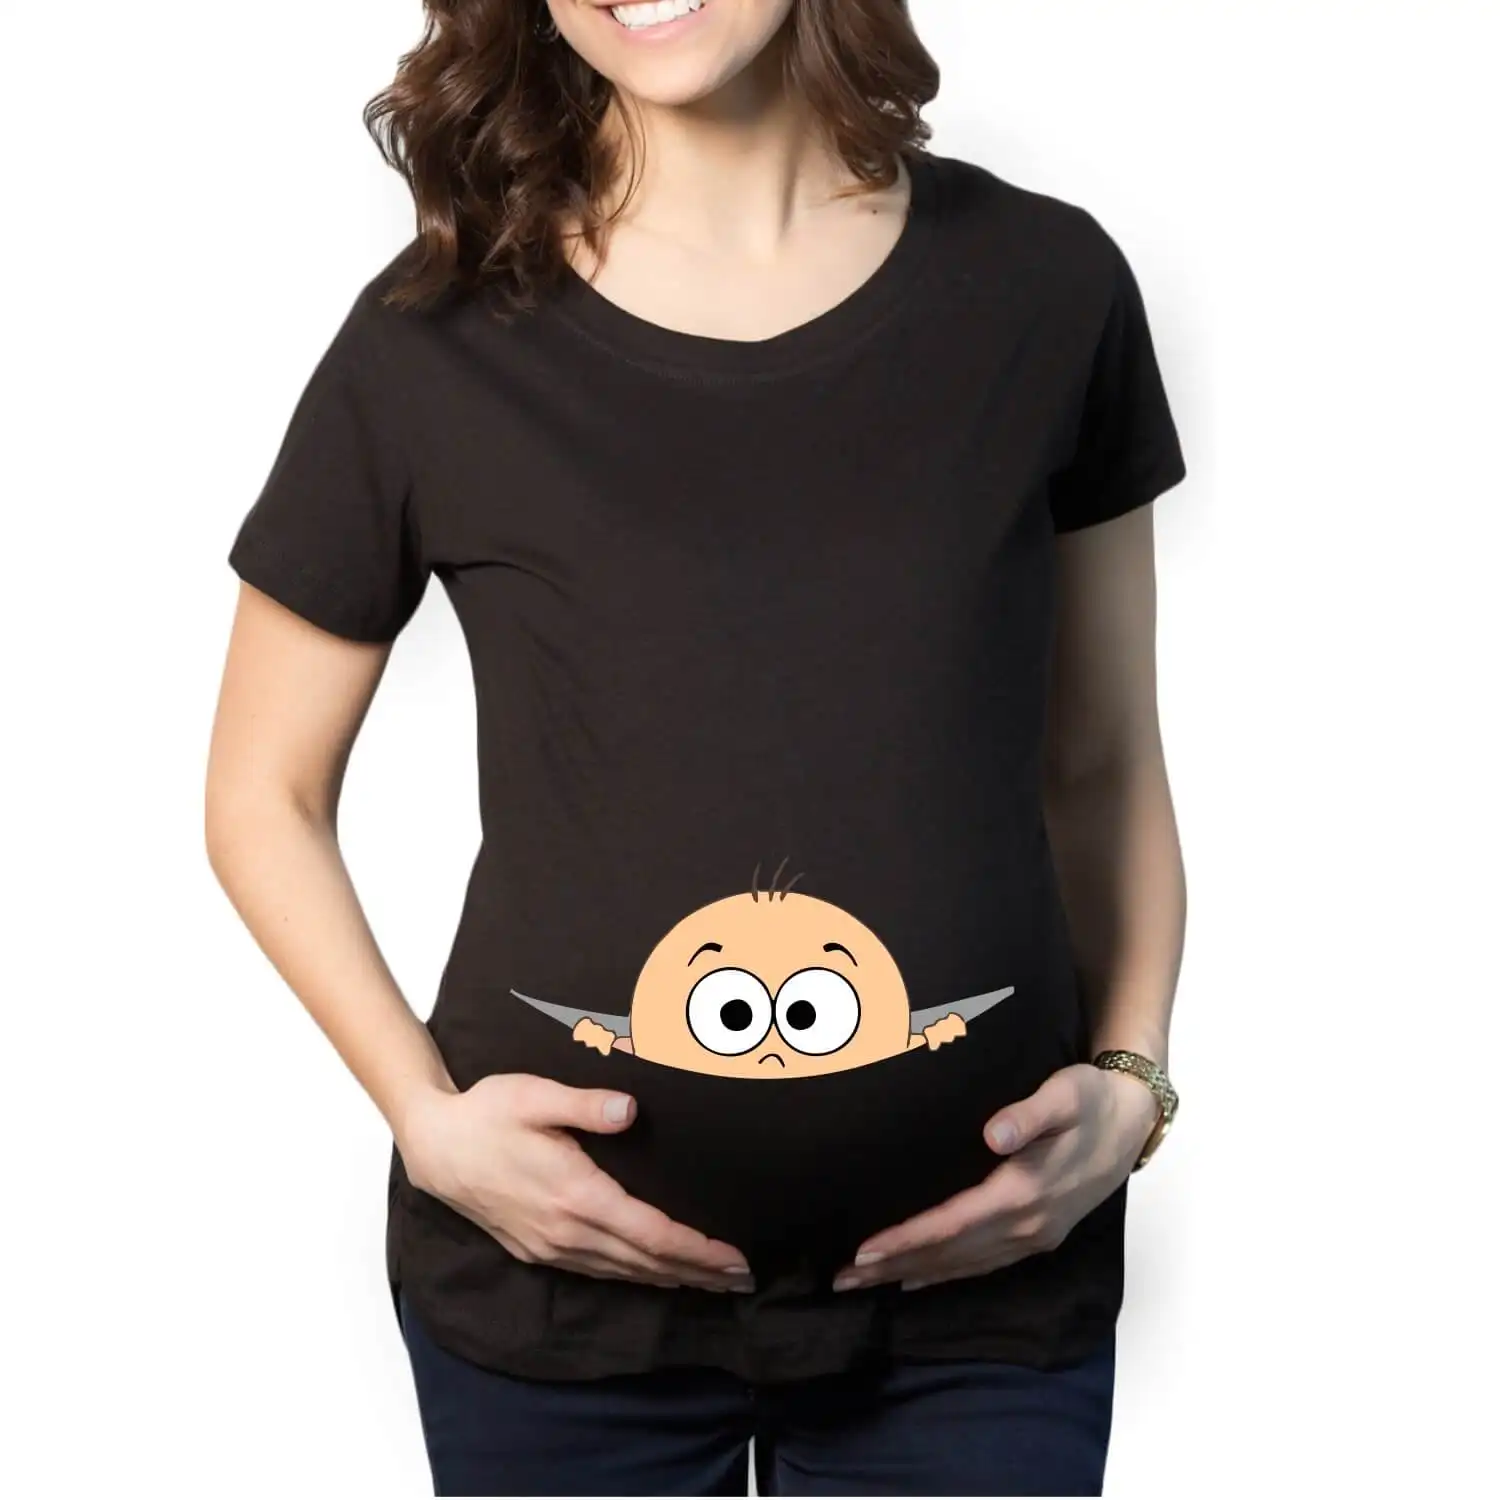 Maternity t shirts - Plain Black Color High Quality For Women